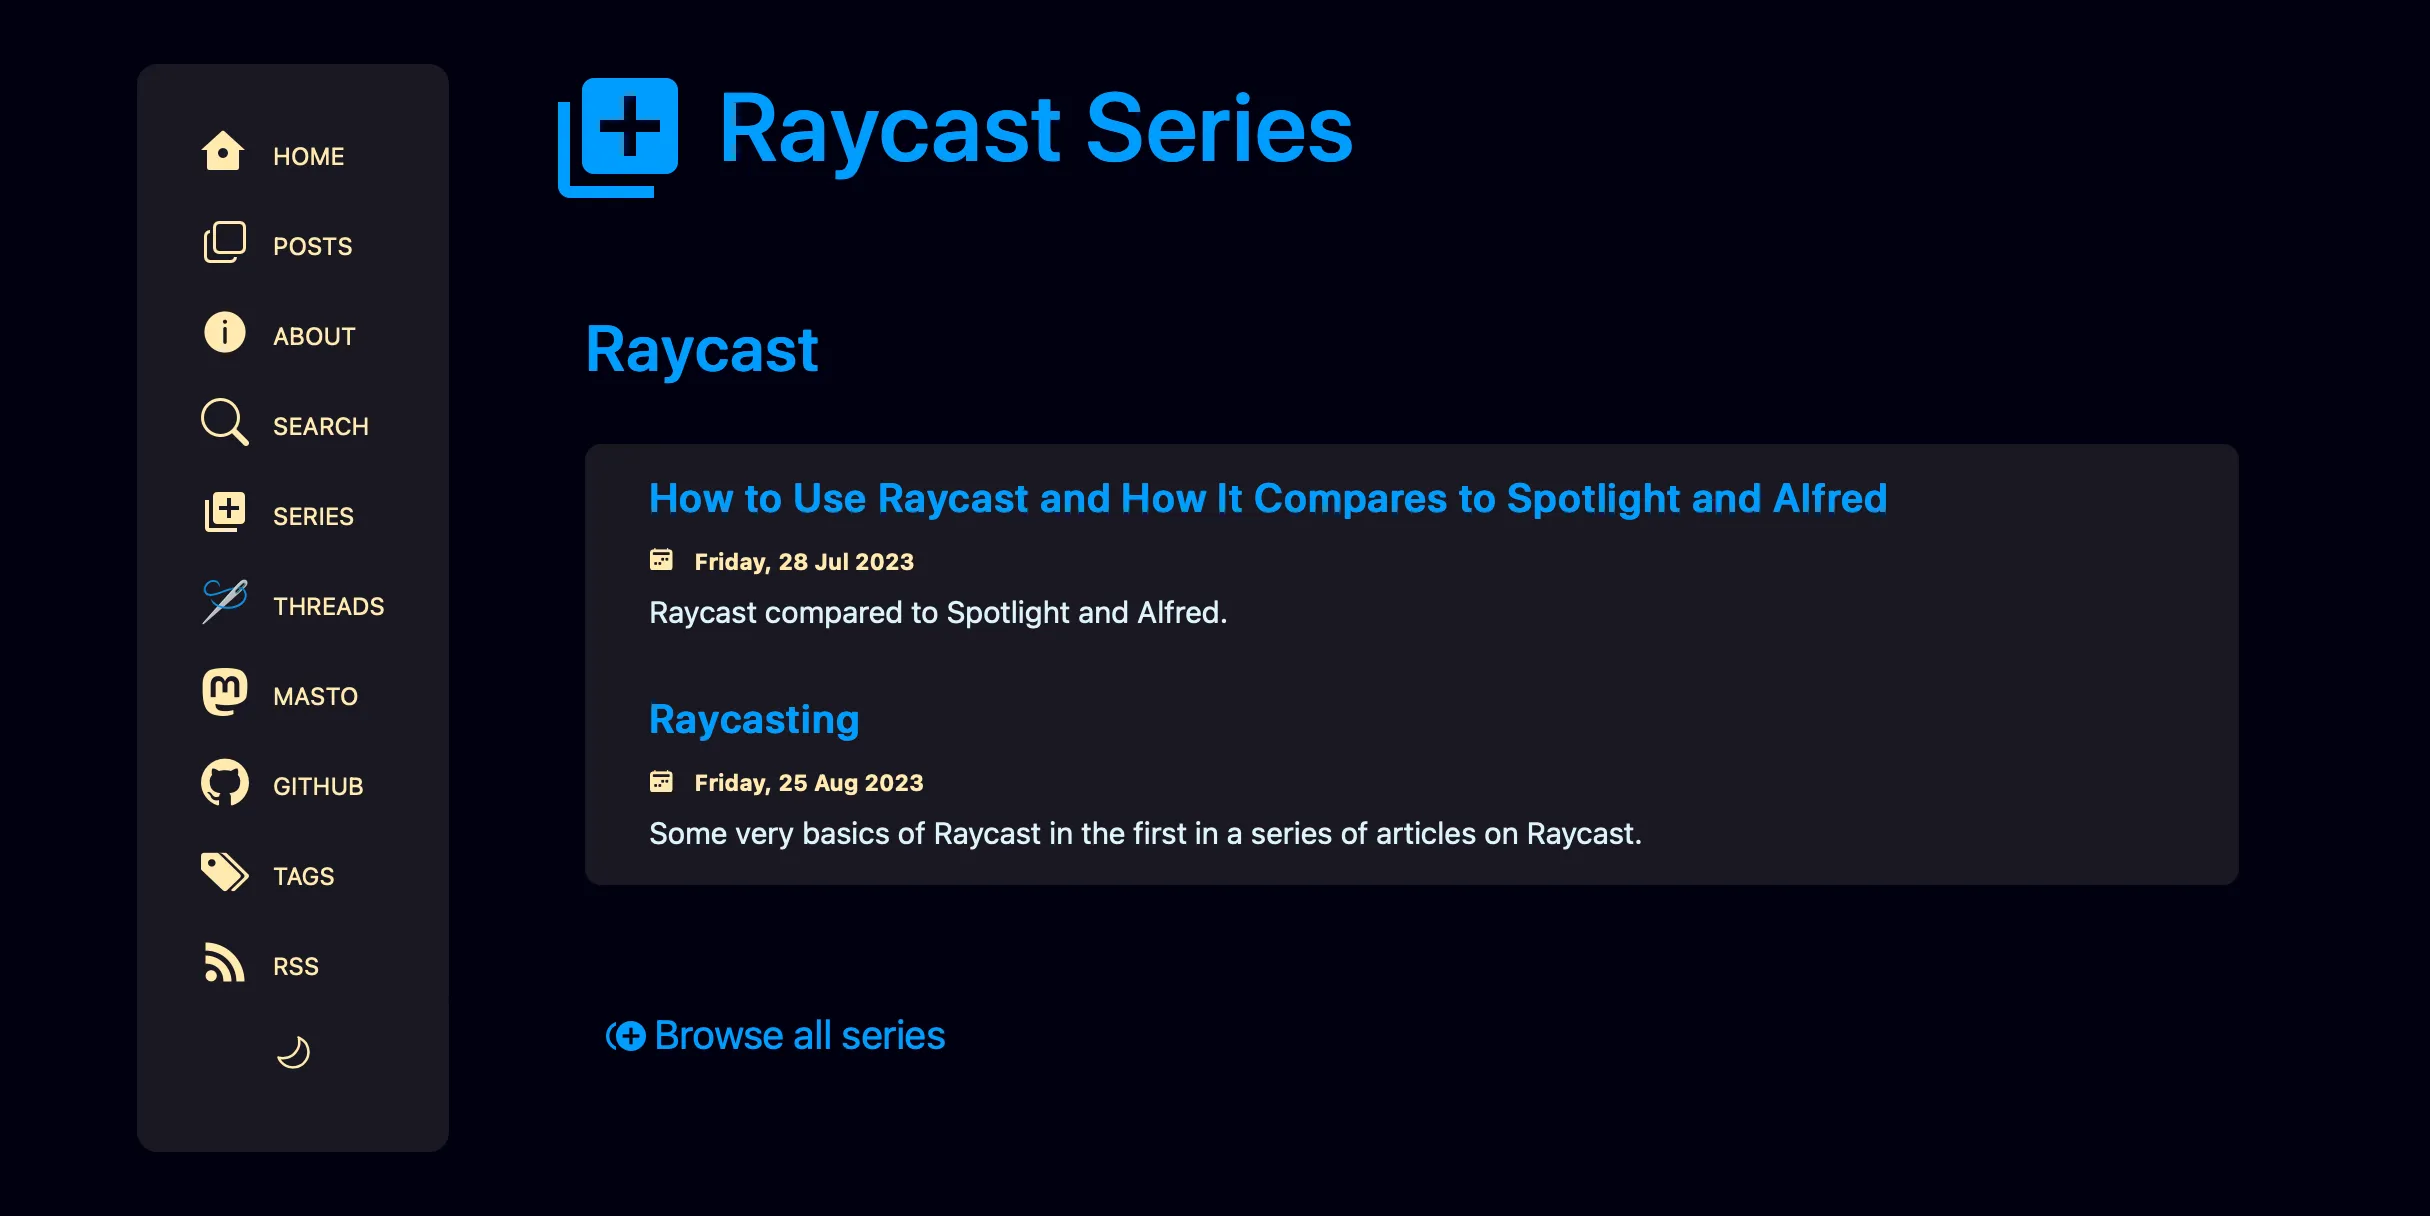 Raycast series page